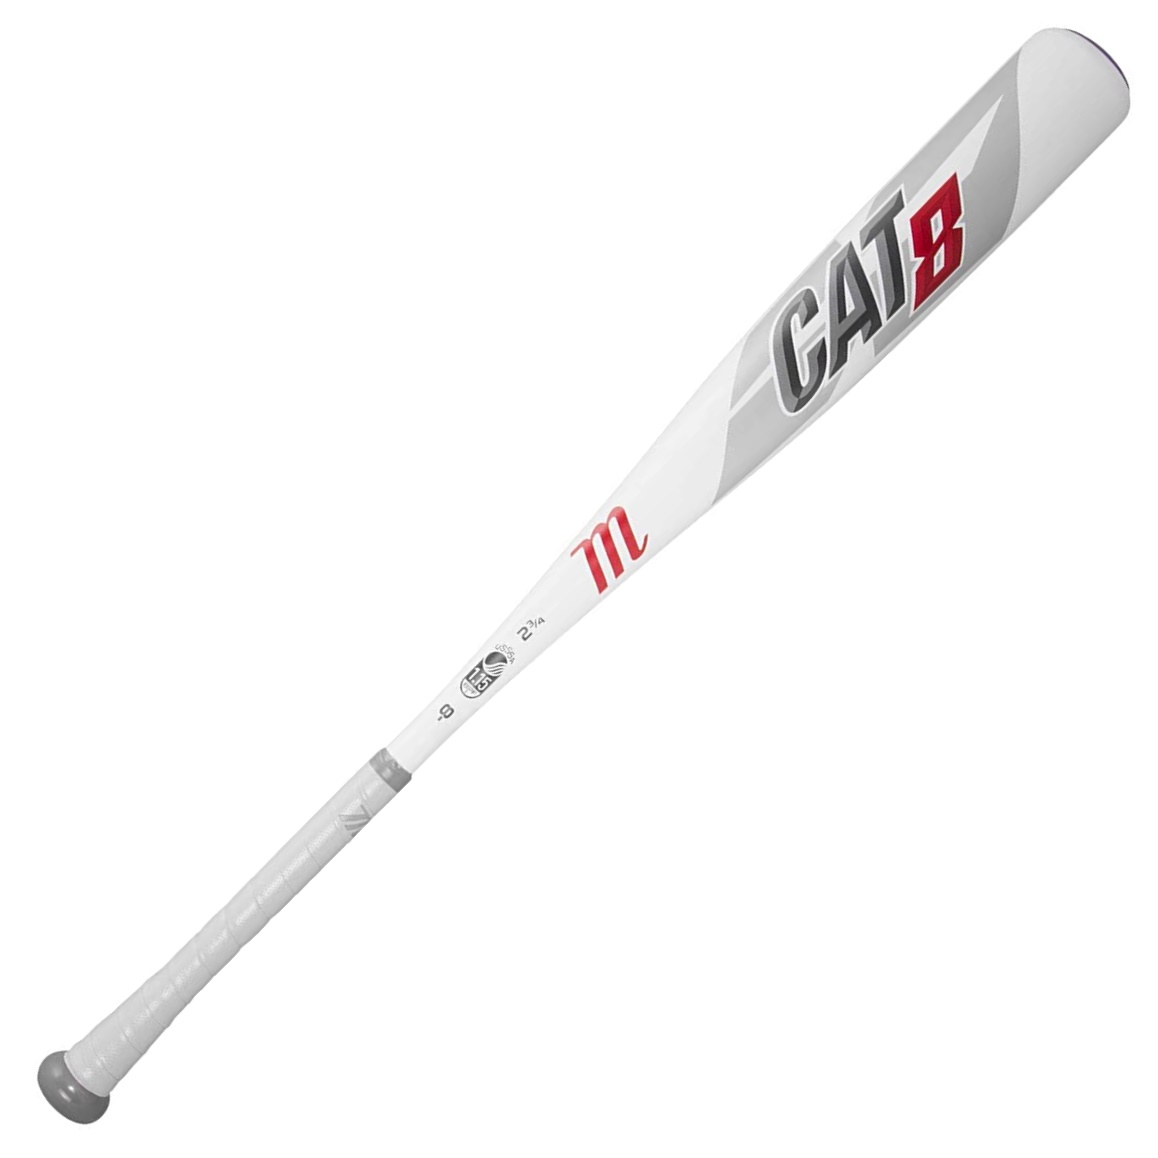 marucci-cat-8-5-usssa-baseball-bat-32-inch-27-oz MSBC85-3227 Marucci  <h1 class=productView-title-lower>CAT8 -5</h1> The CAT8 -5 is a USSSA certified one-piece